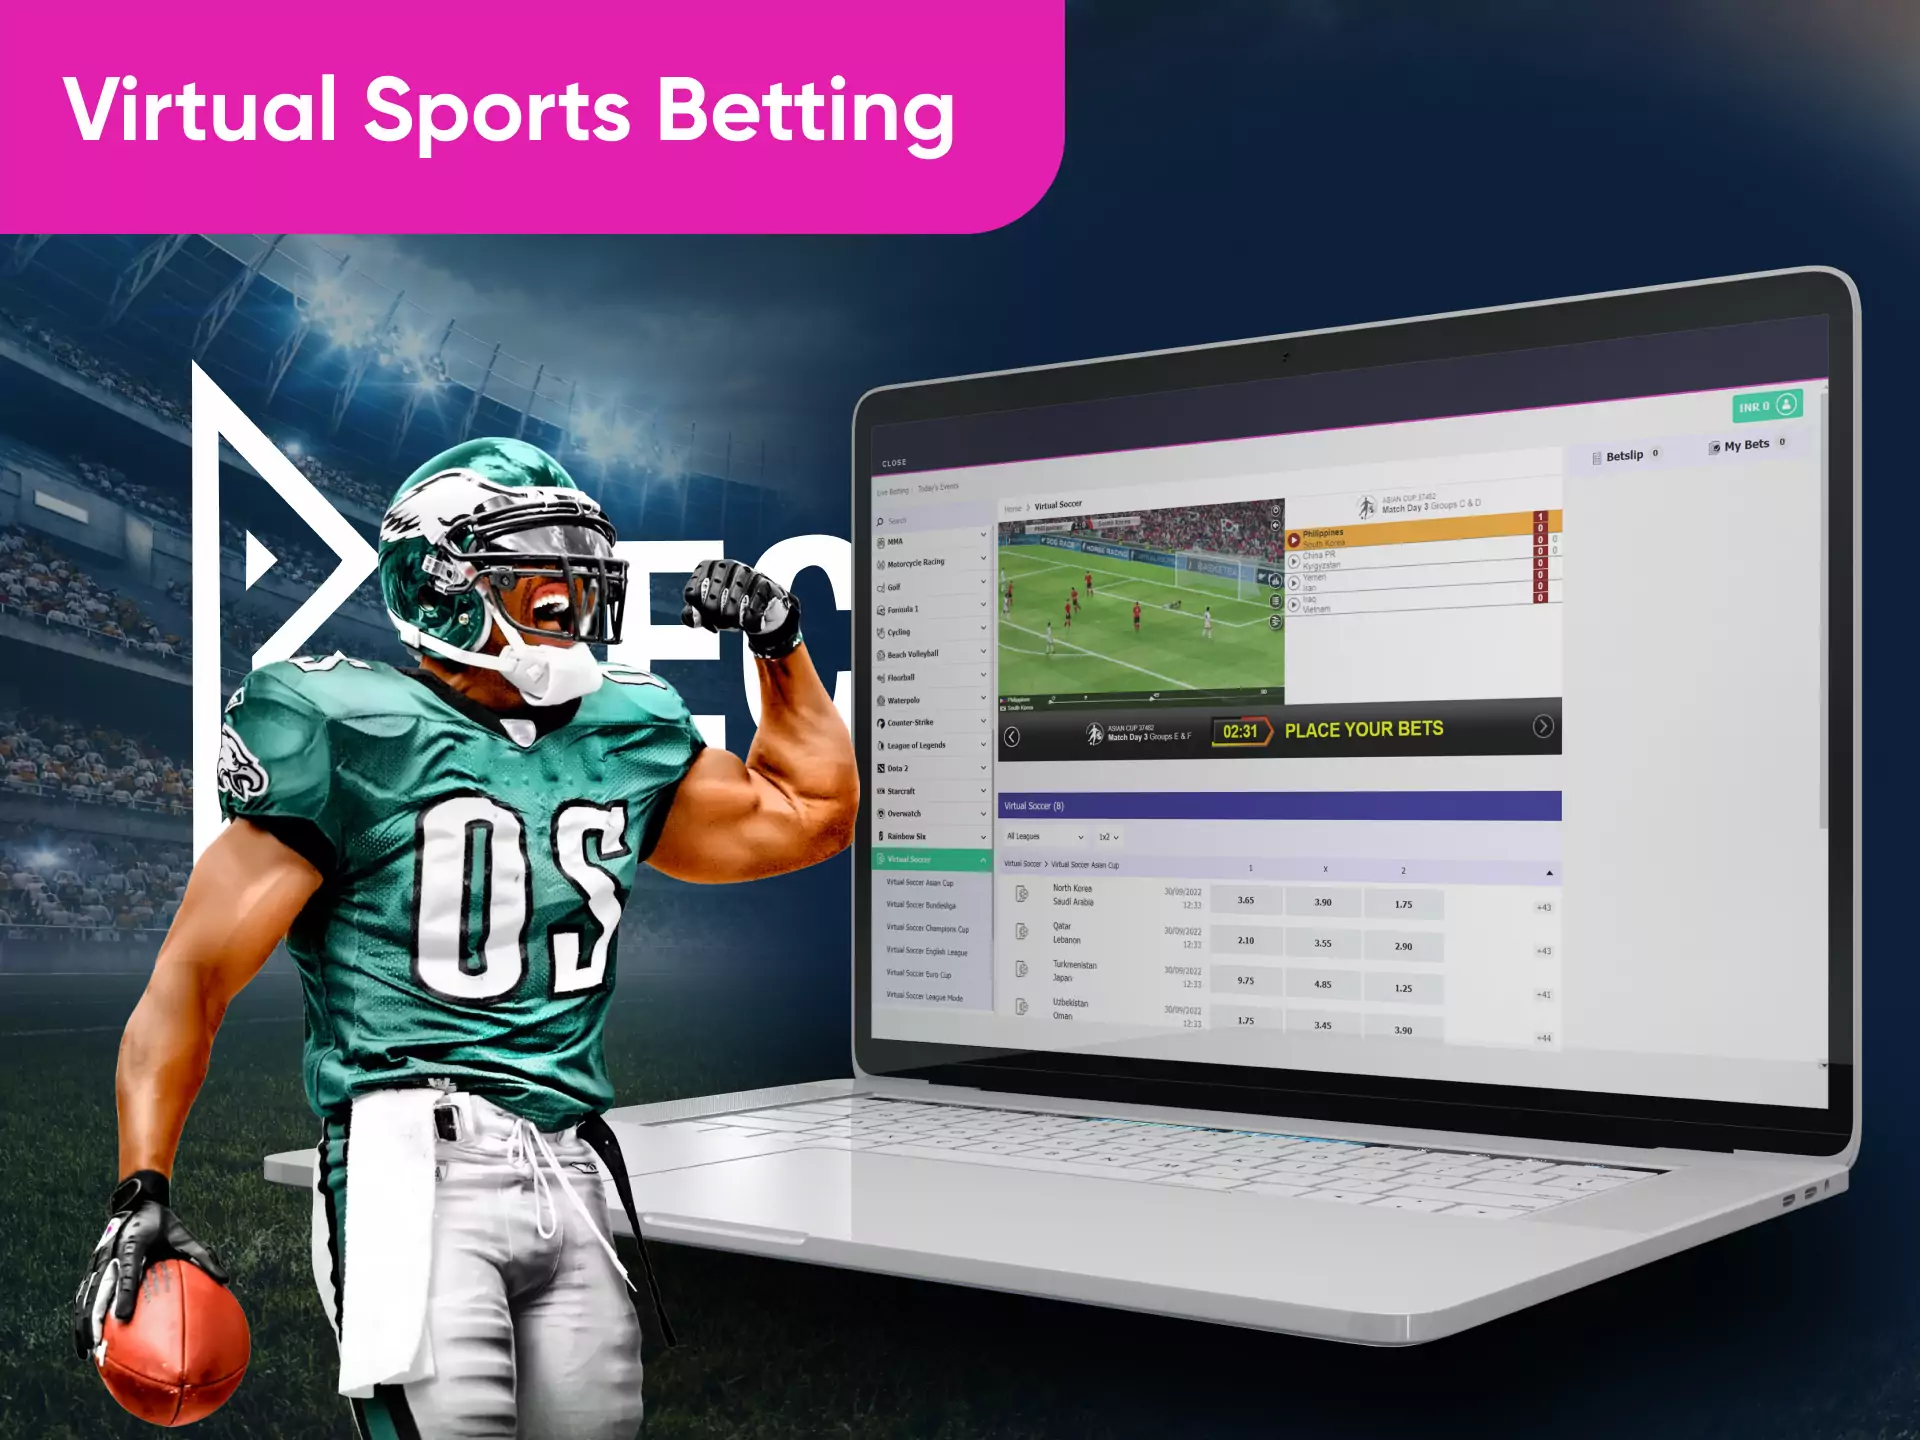 Besides traditional betting, on Becric you can place bets on virtual sports events.